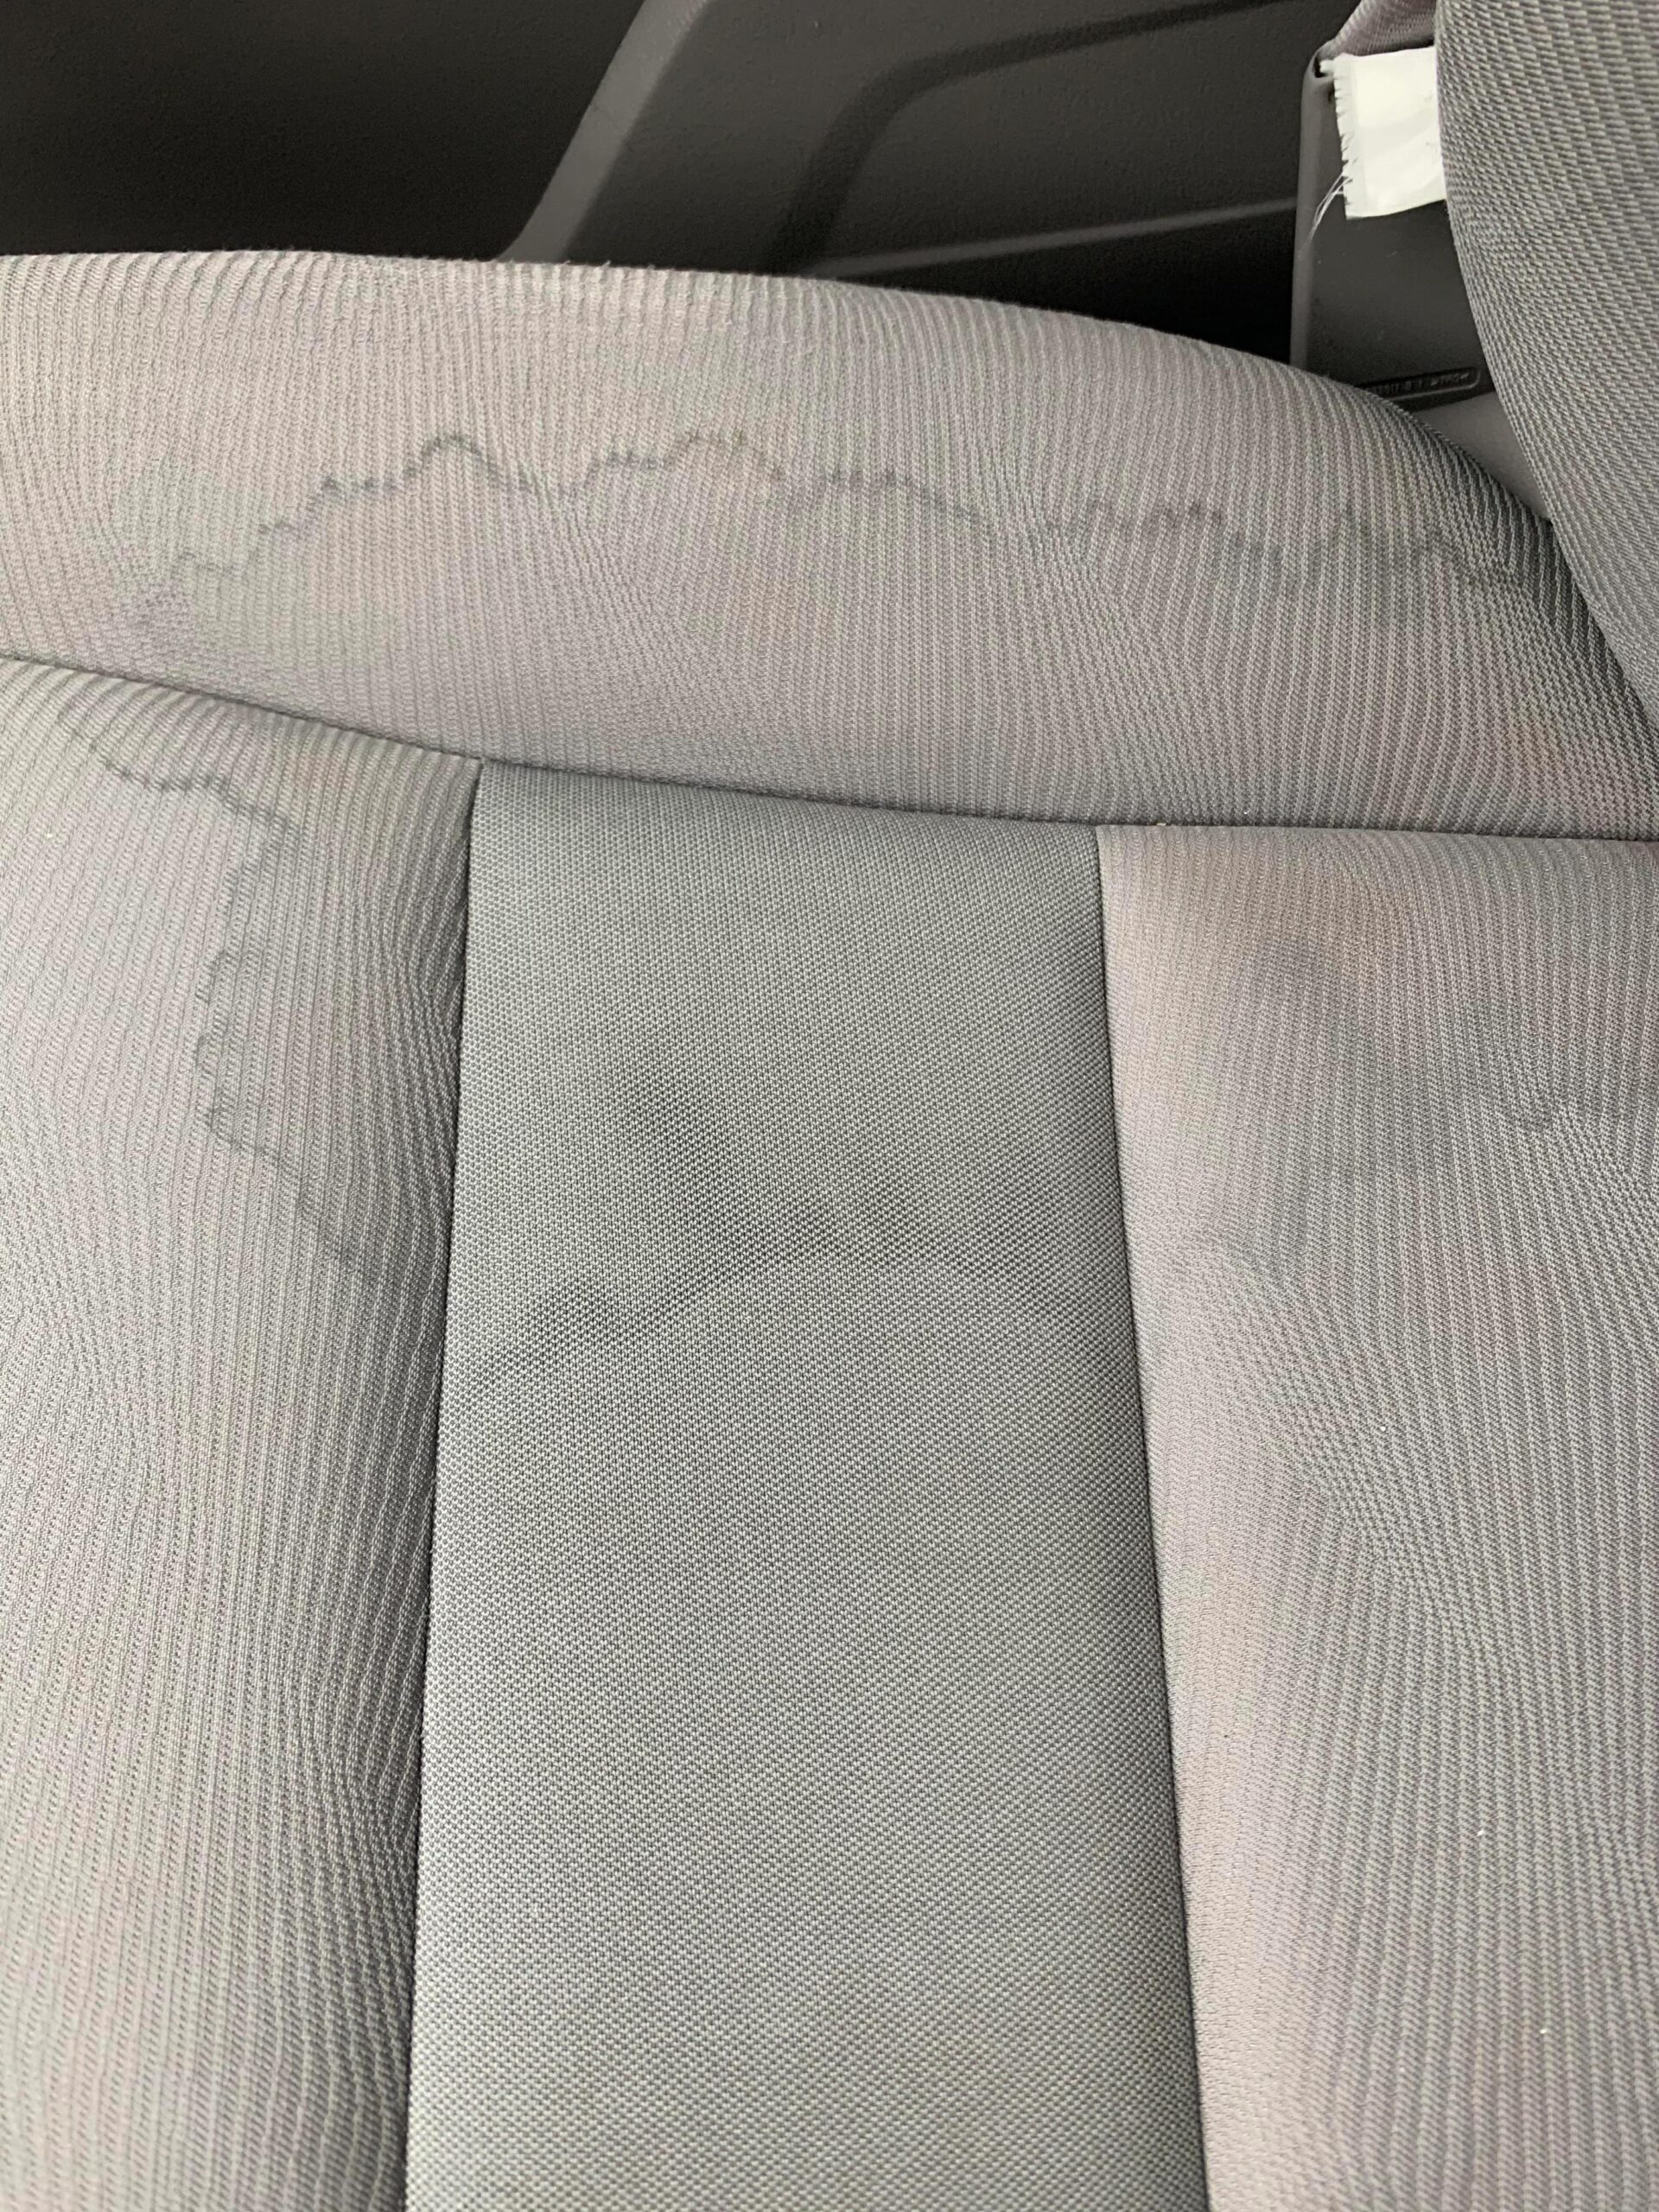 How to Get a Water Stain Out of Car Seat